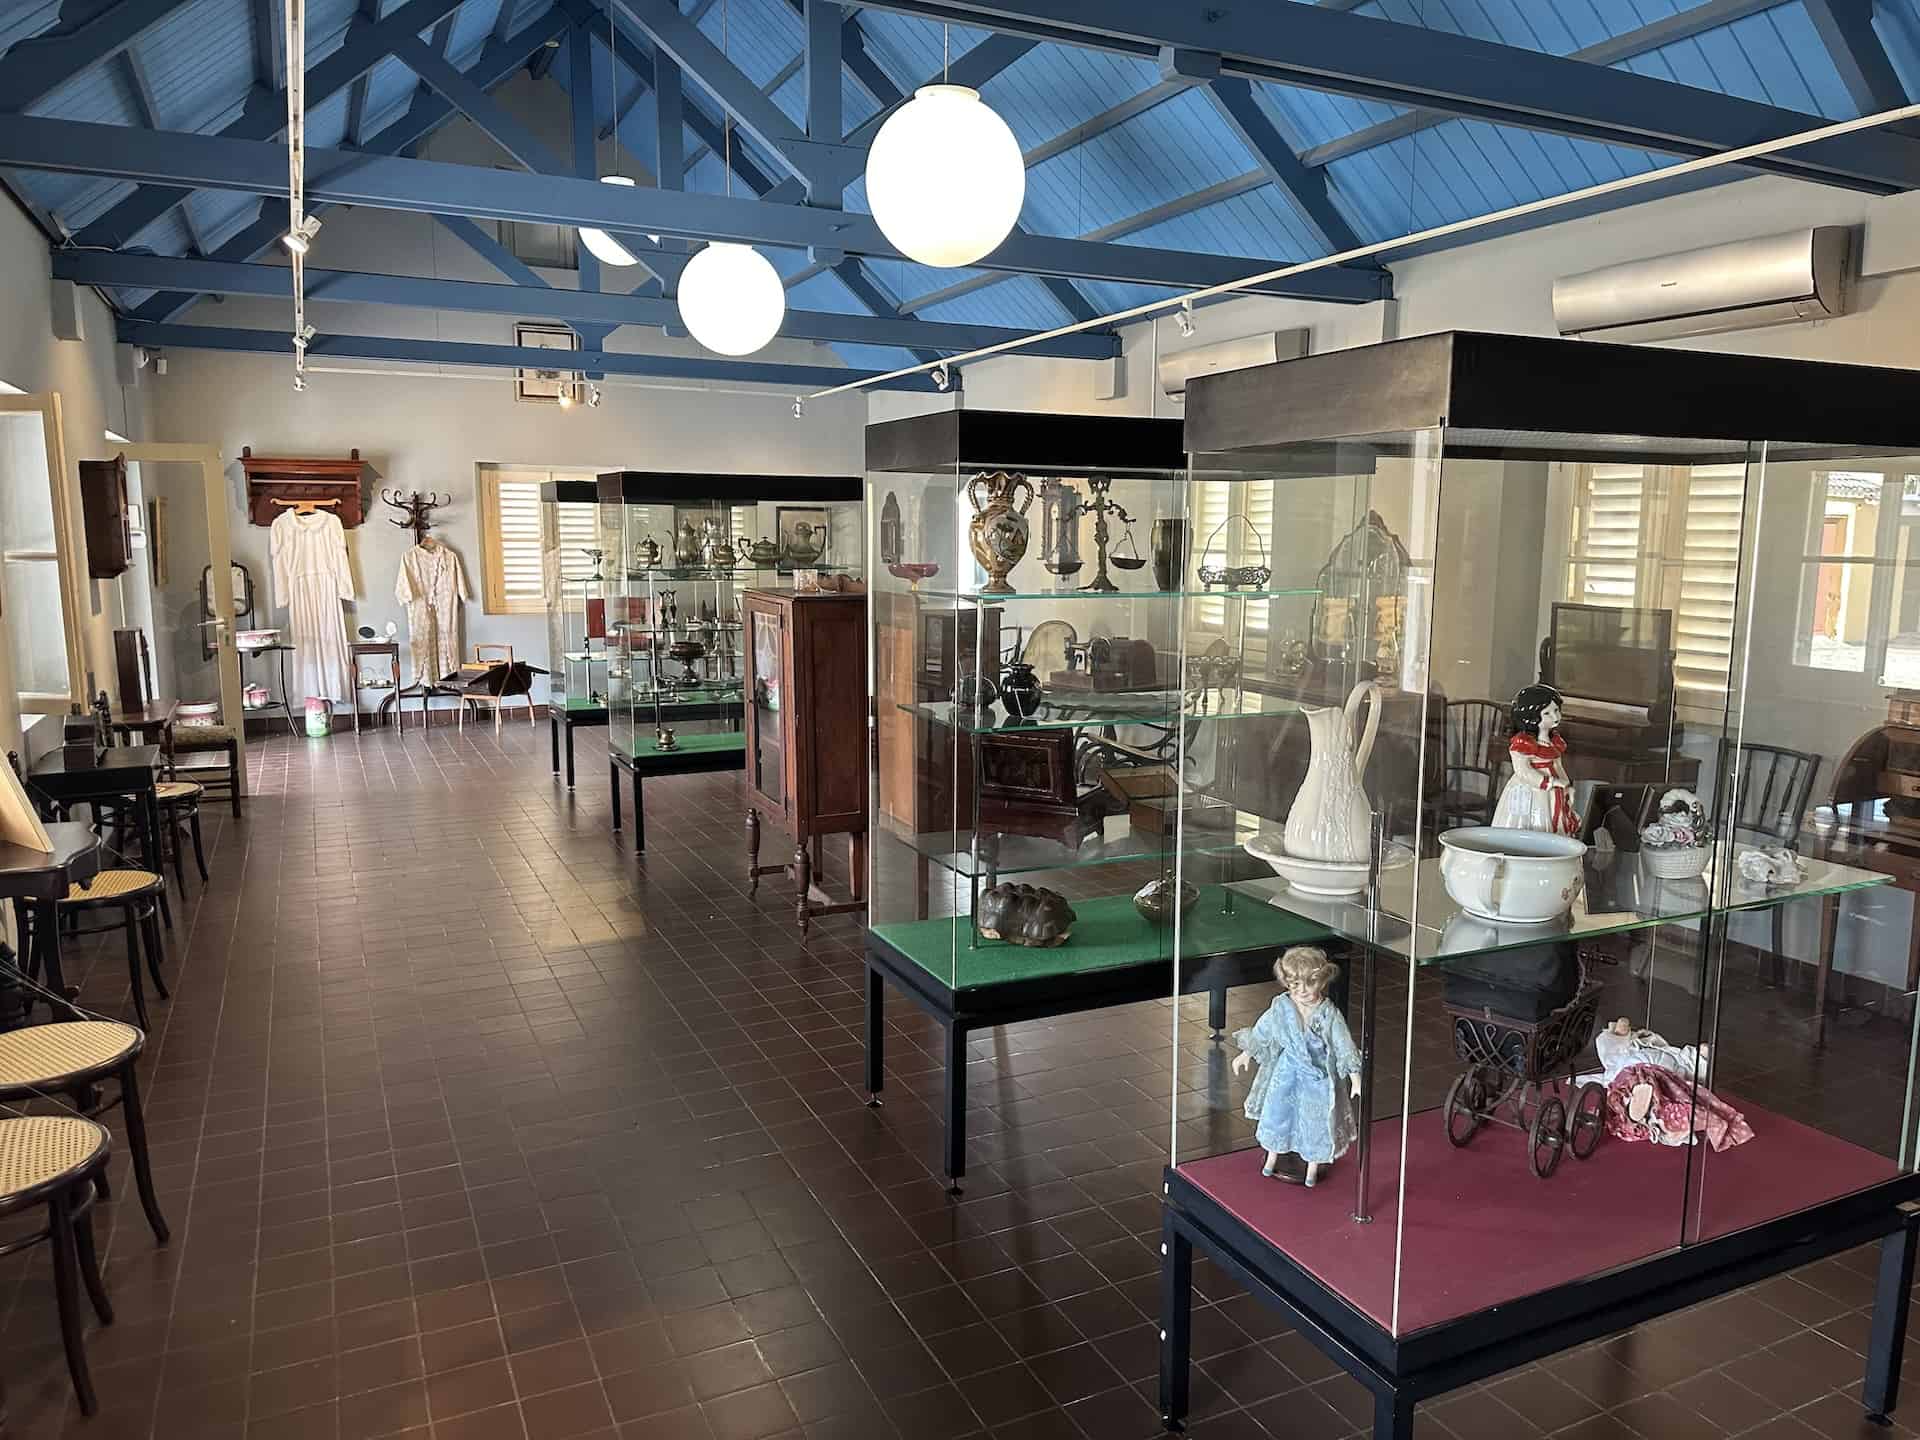 Second gallery at the Historical Museum of Aruba in Oranjestad